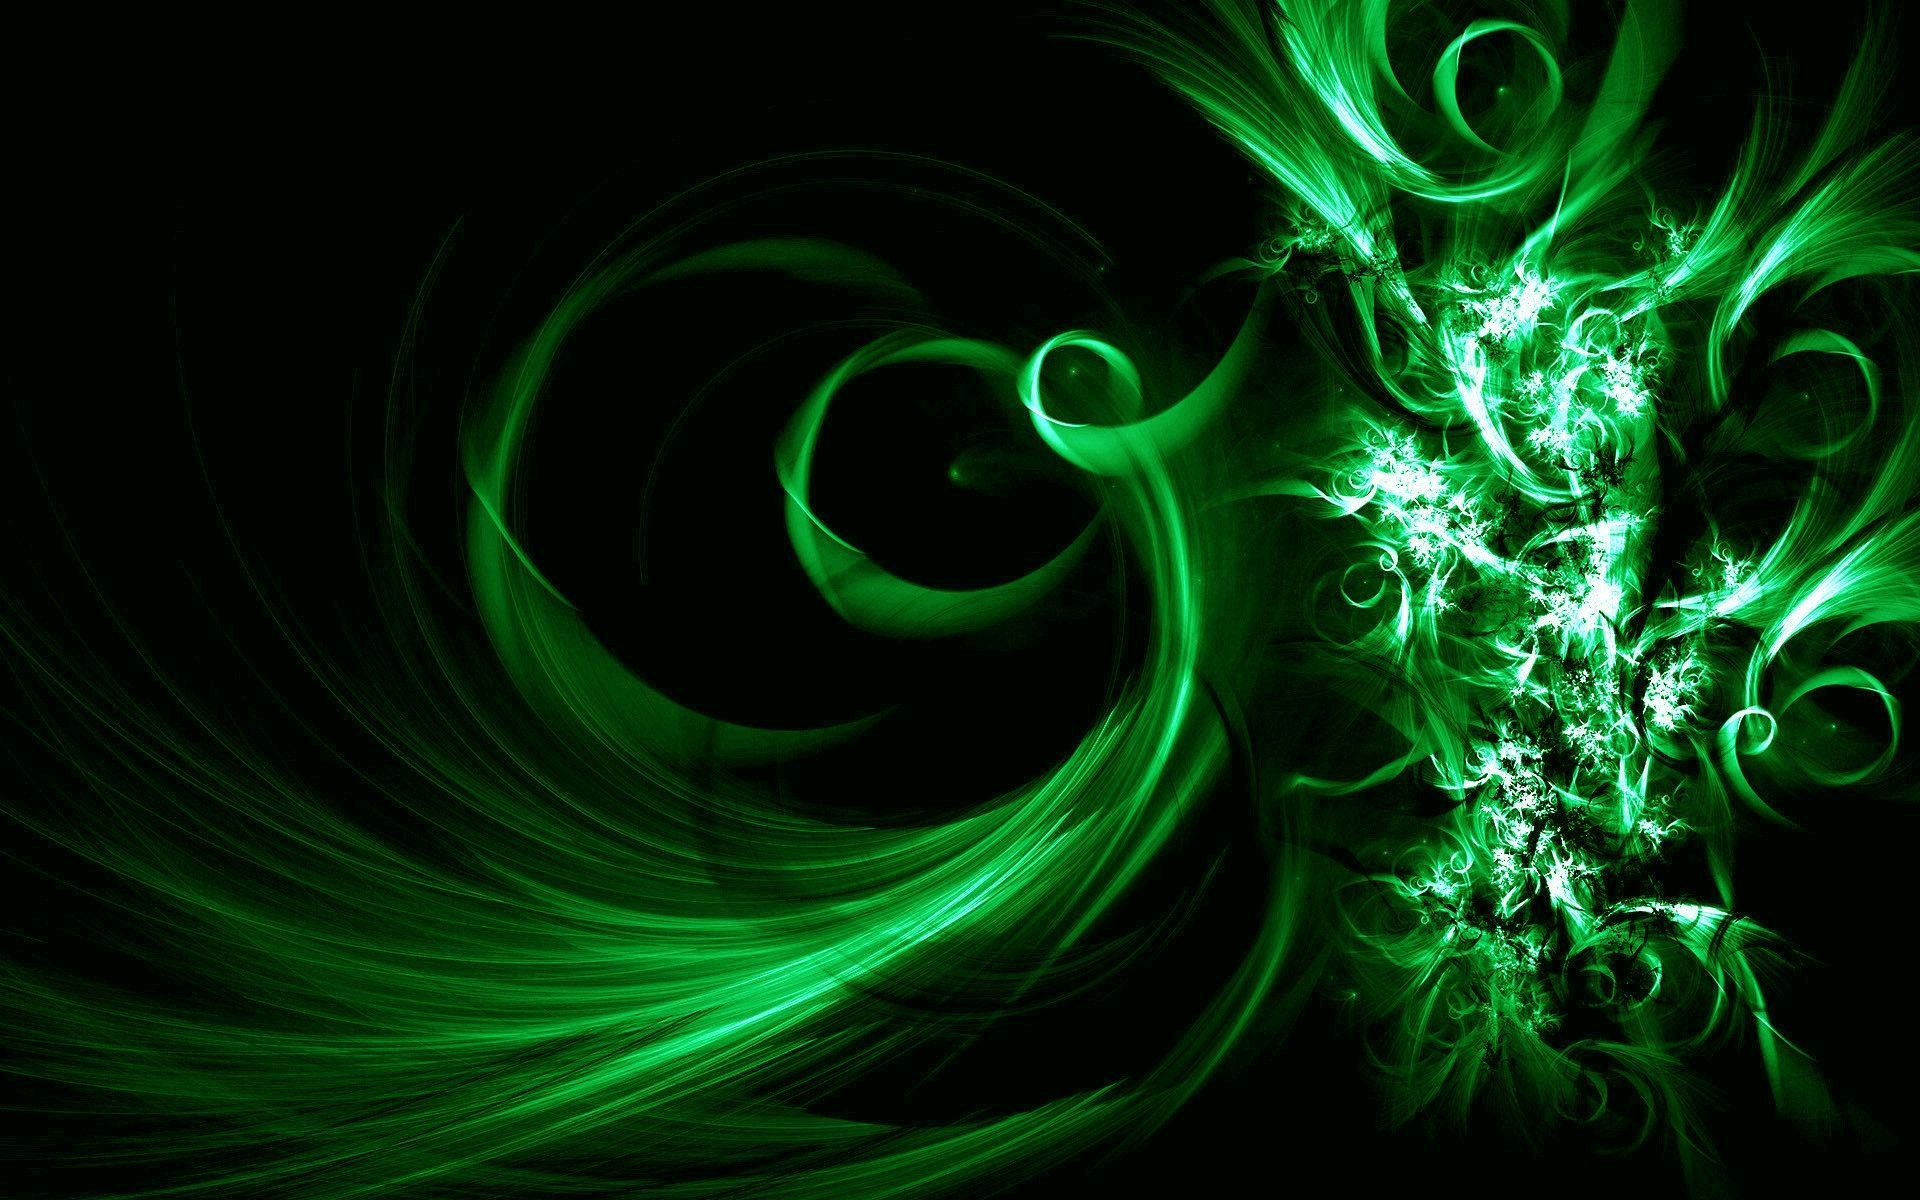 1920x1200 Black And Lime Green Wallpapers Group 1920Ã1200 Green Backgrounds Wallpapers  (39 Wallpapers) | Adorable Wallpapers